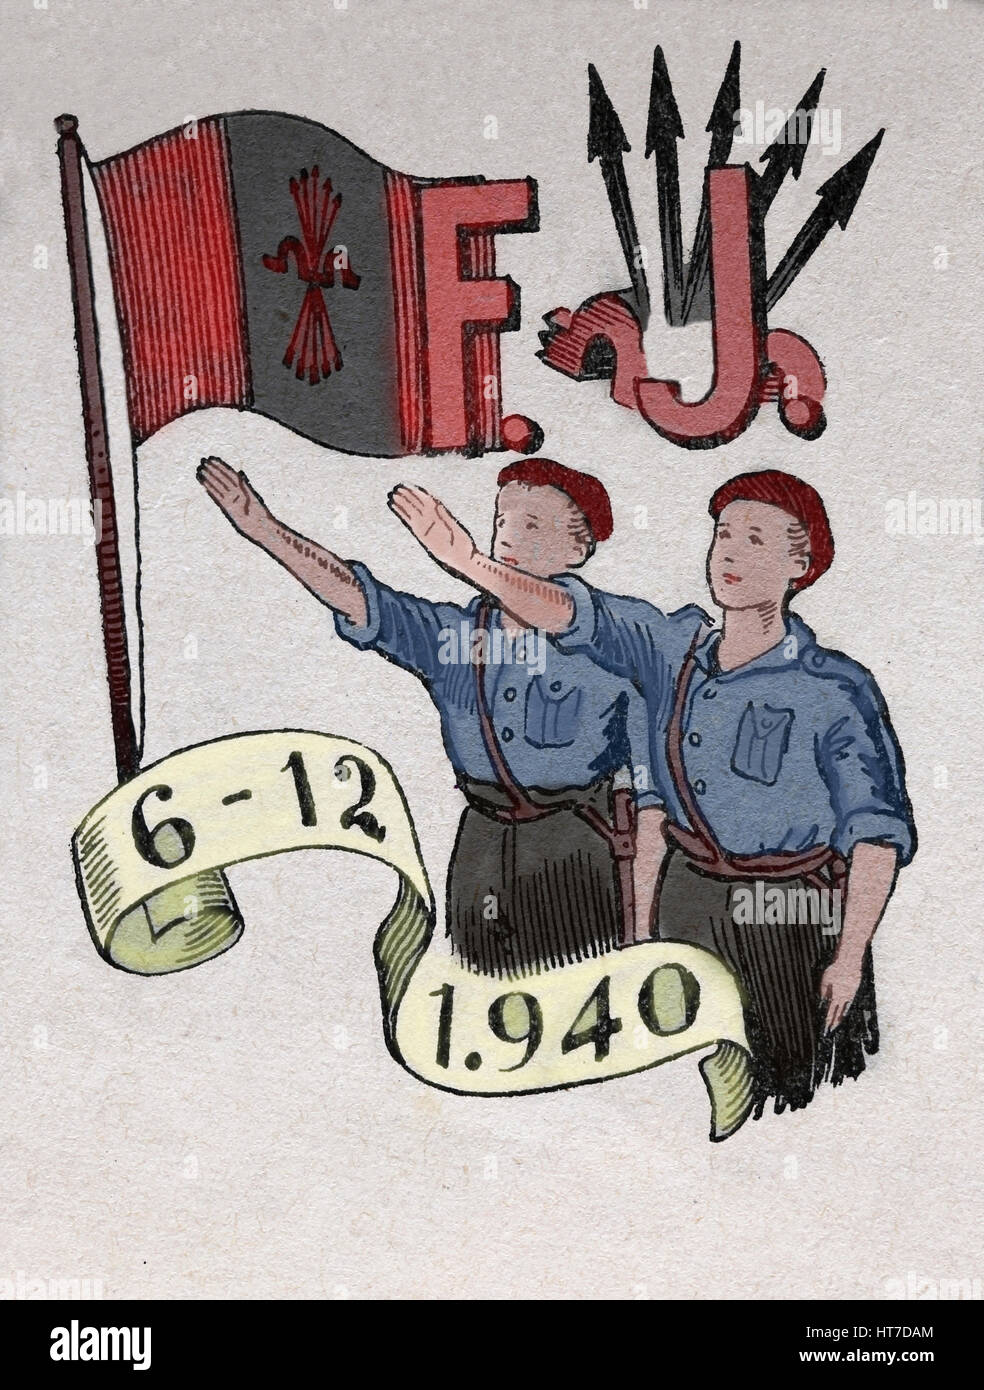 Fascist Falange Youth Movement.  Francoism. Spain. 14th anniversary. Engraving, color. Stock Photo